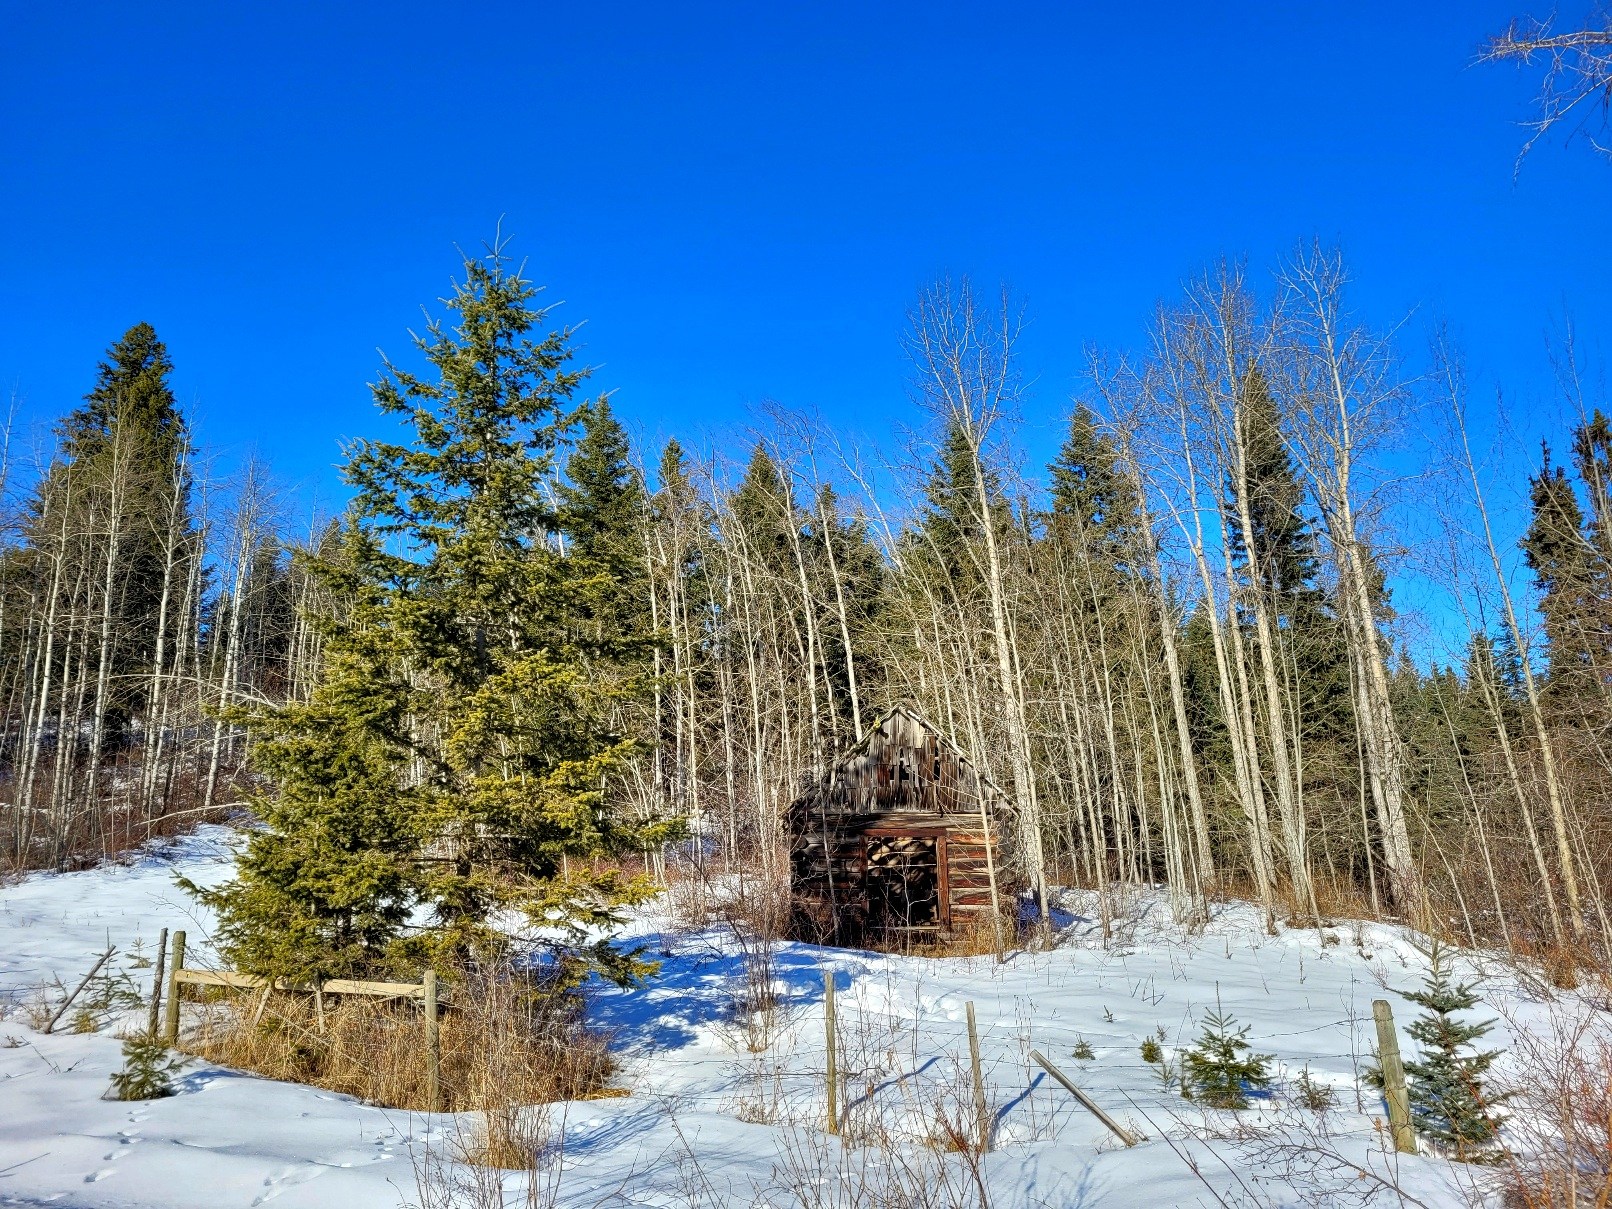 photo of a dilapidated wooden building surrounded by snow and trees